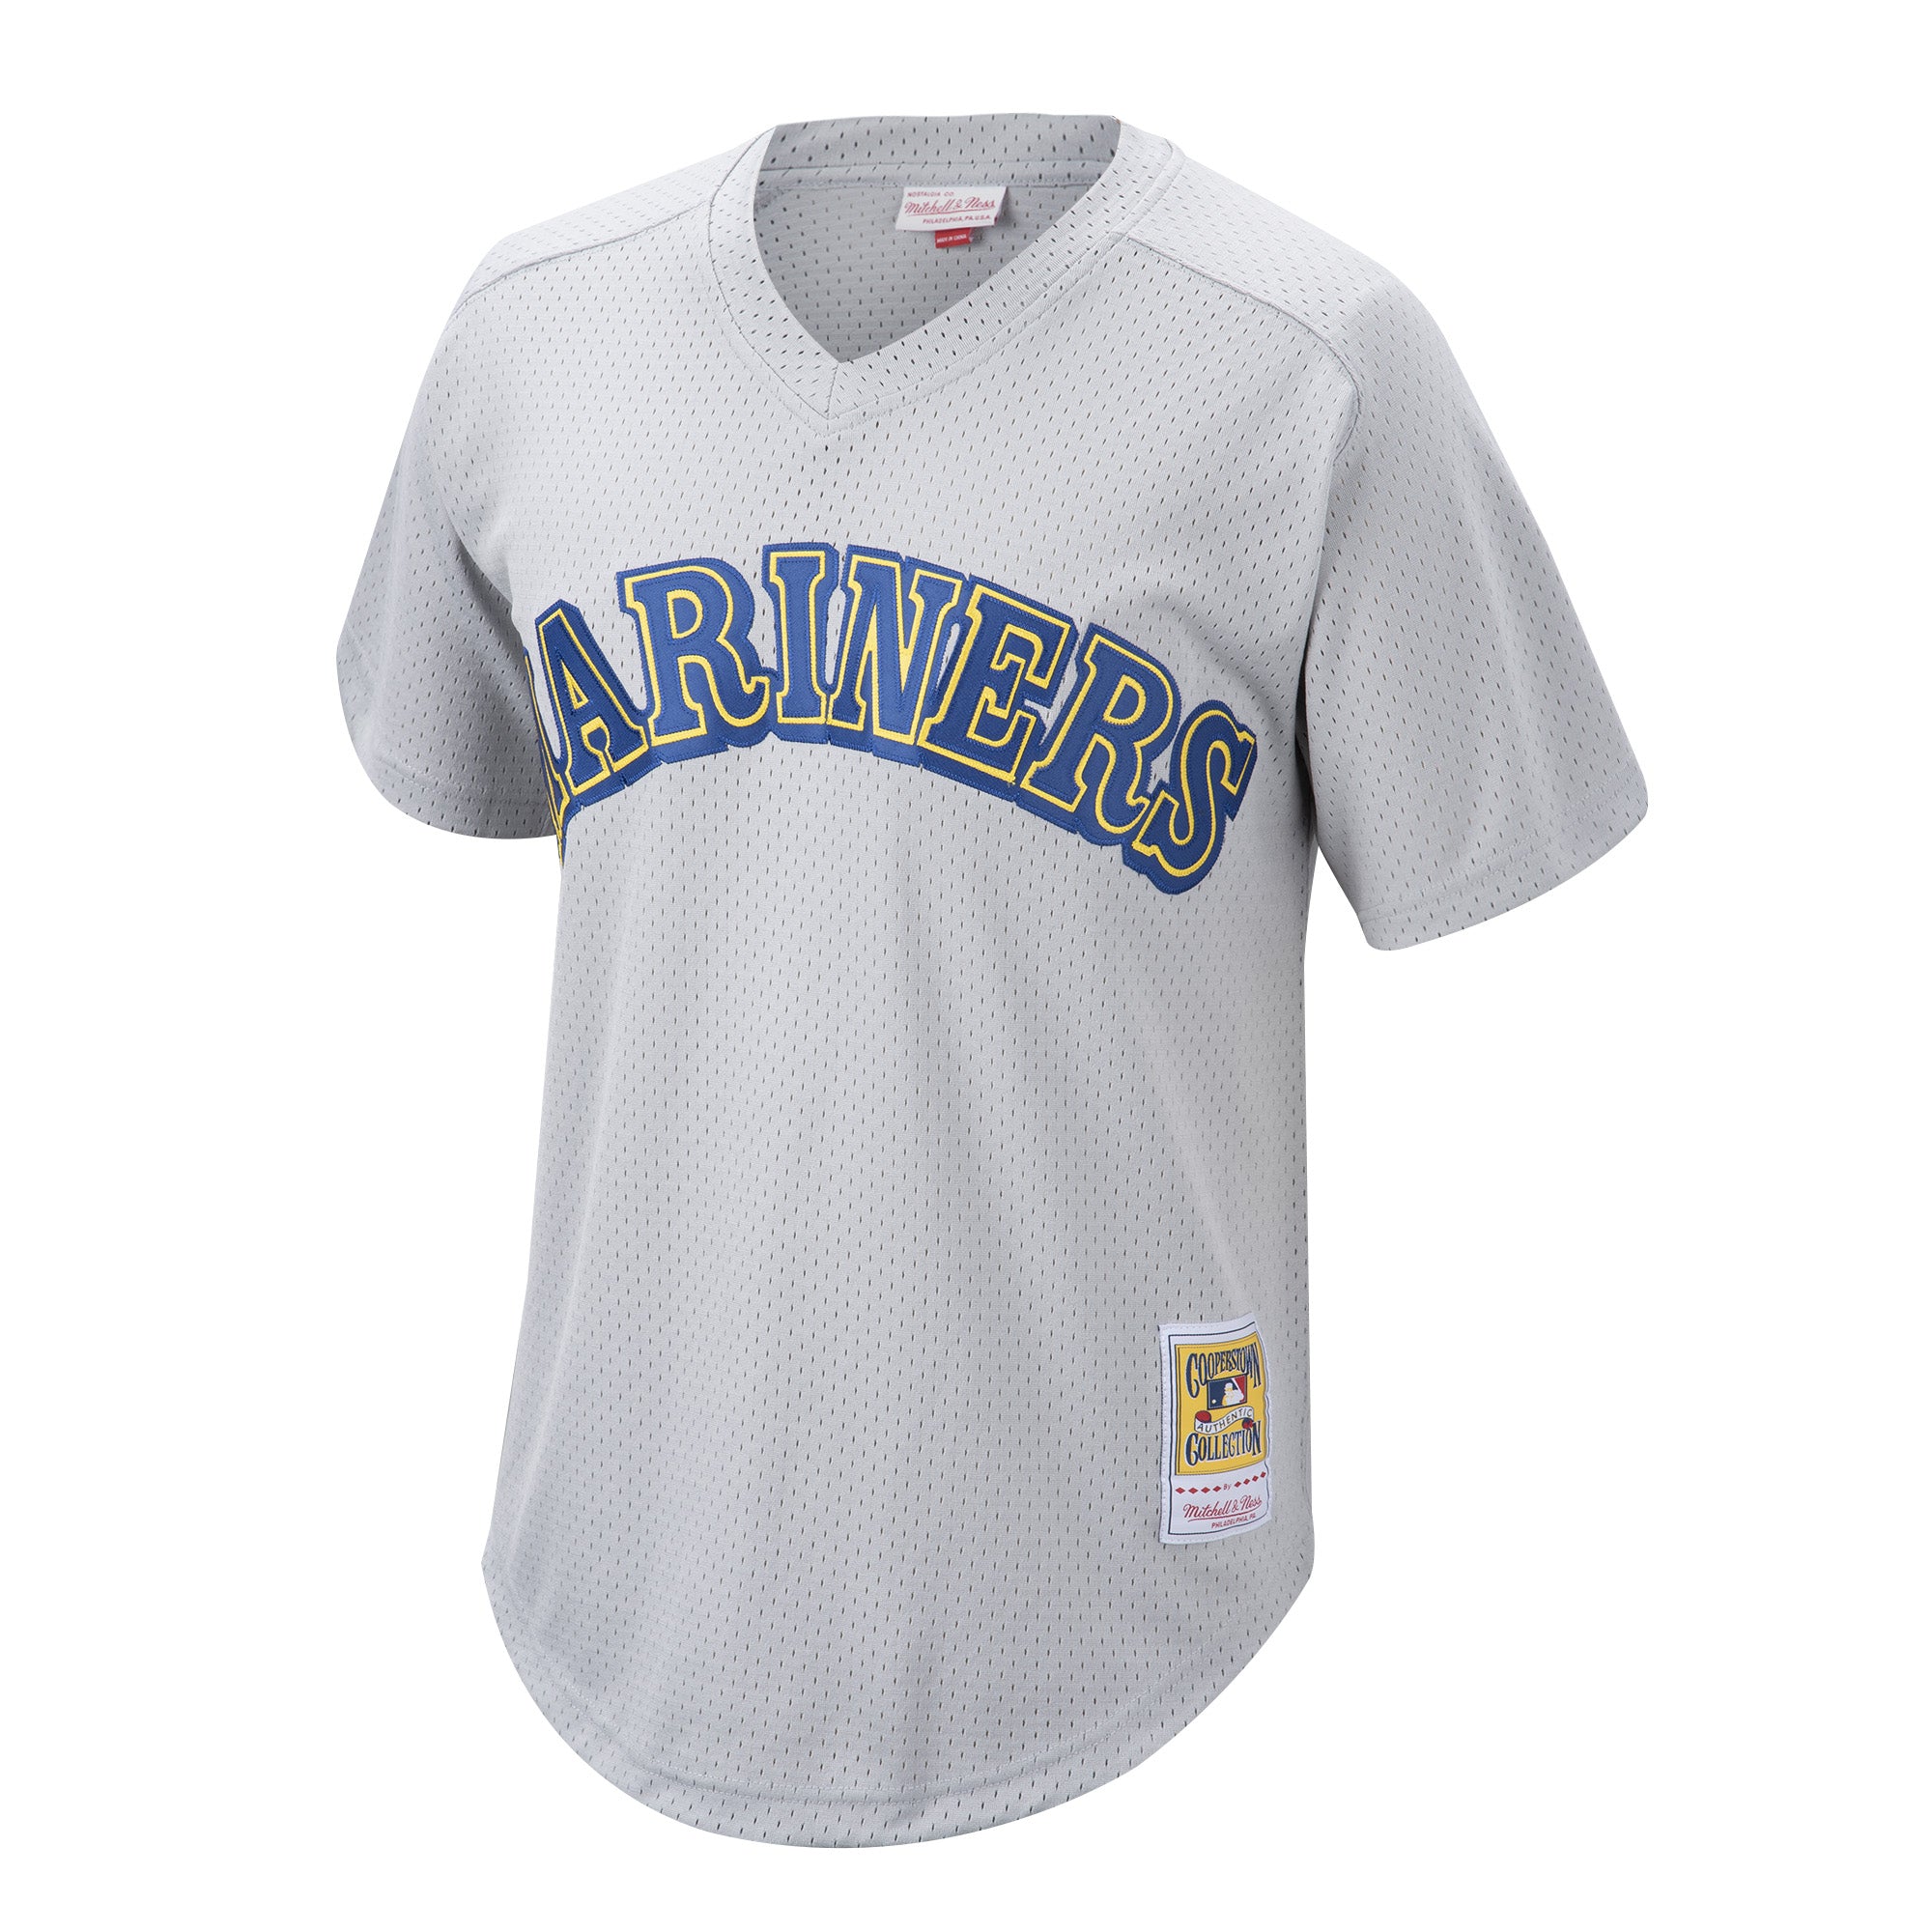 NWT AUTHENTIC MITCHELL & NESS PERRY 82 SEATTLE MARINERS TRIDENT WHITE  JERSEY 4X